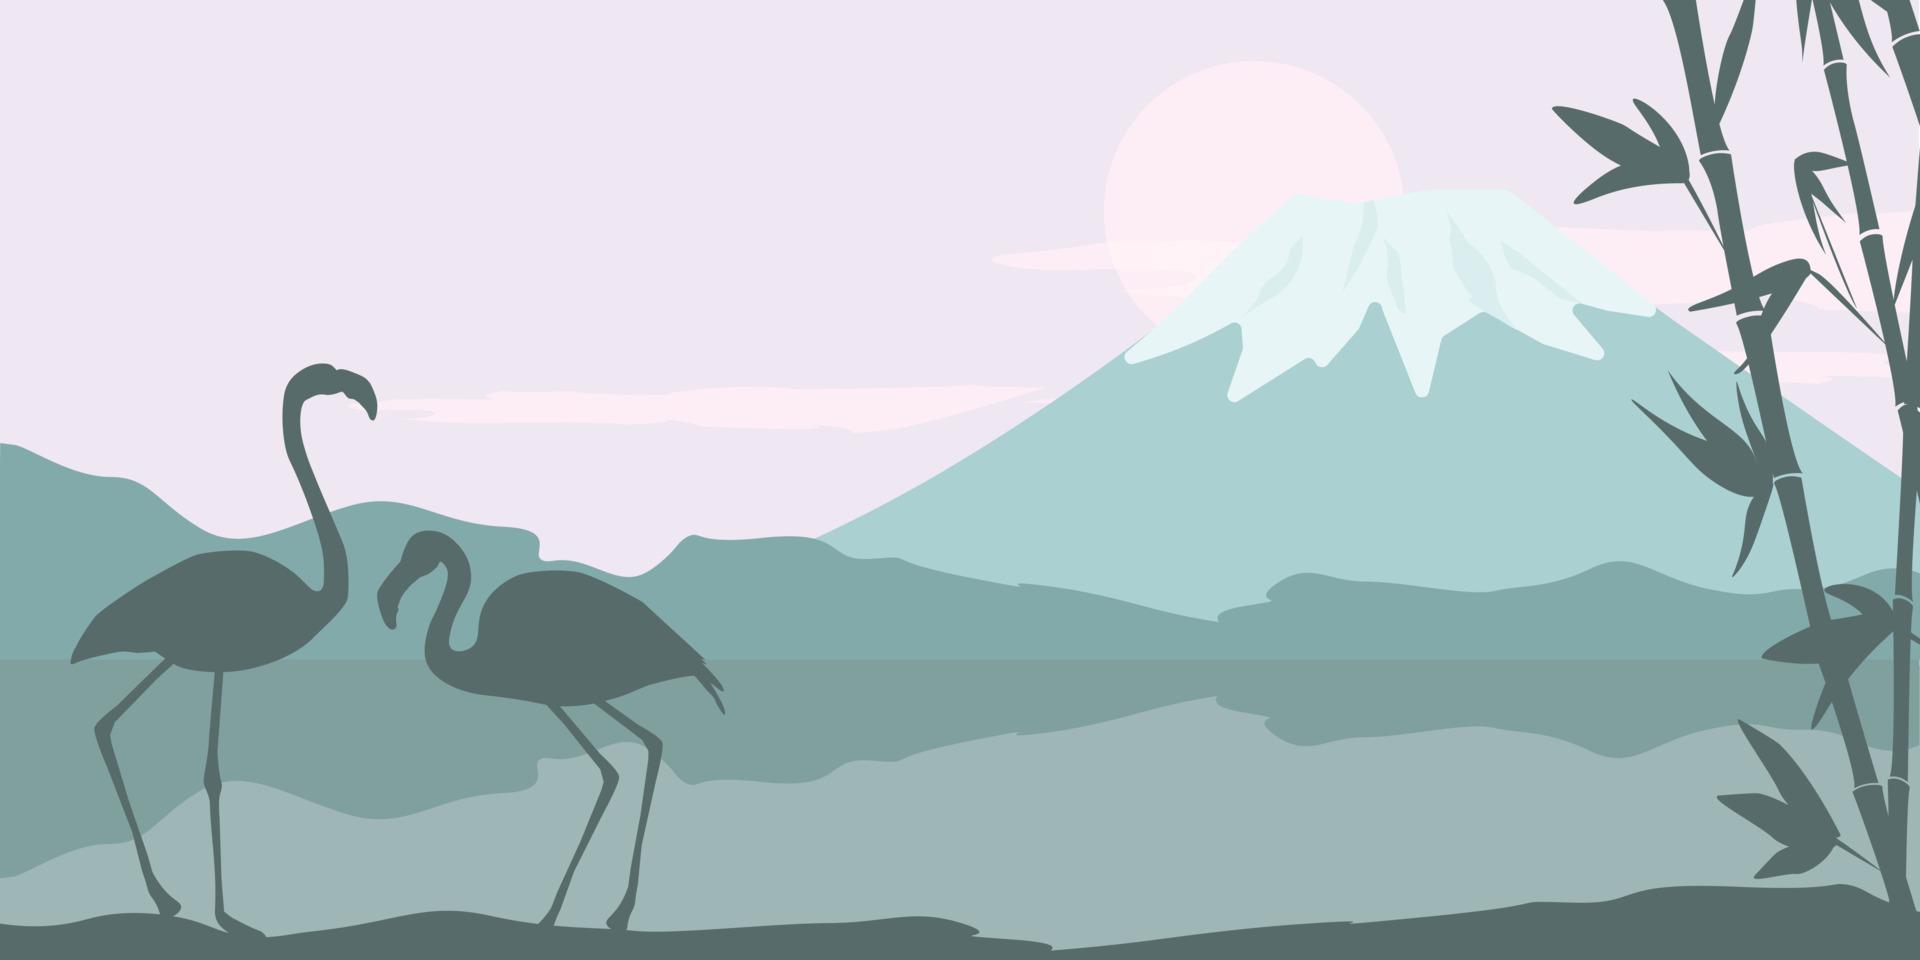 Horizontal banner with a natural landscape. Silhouettes of flamingos against the background of water, lakes and mountains, a sunny circle. Vector graphics.